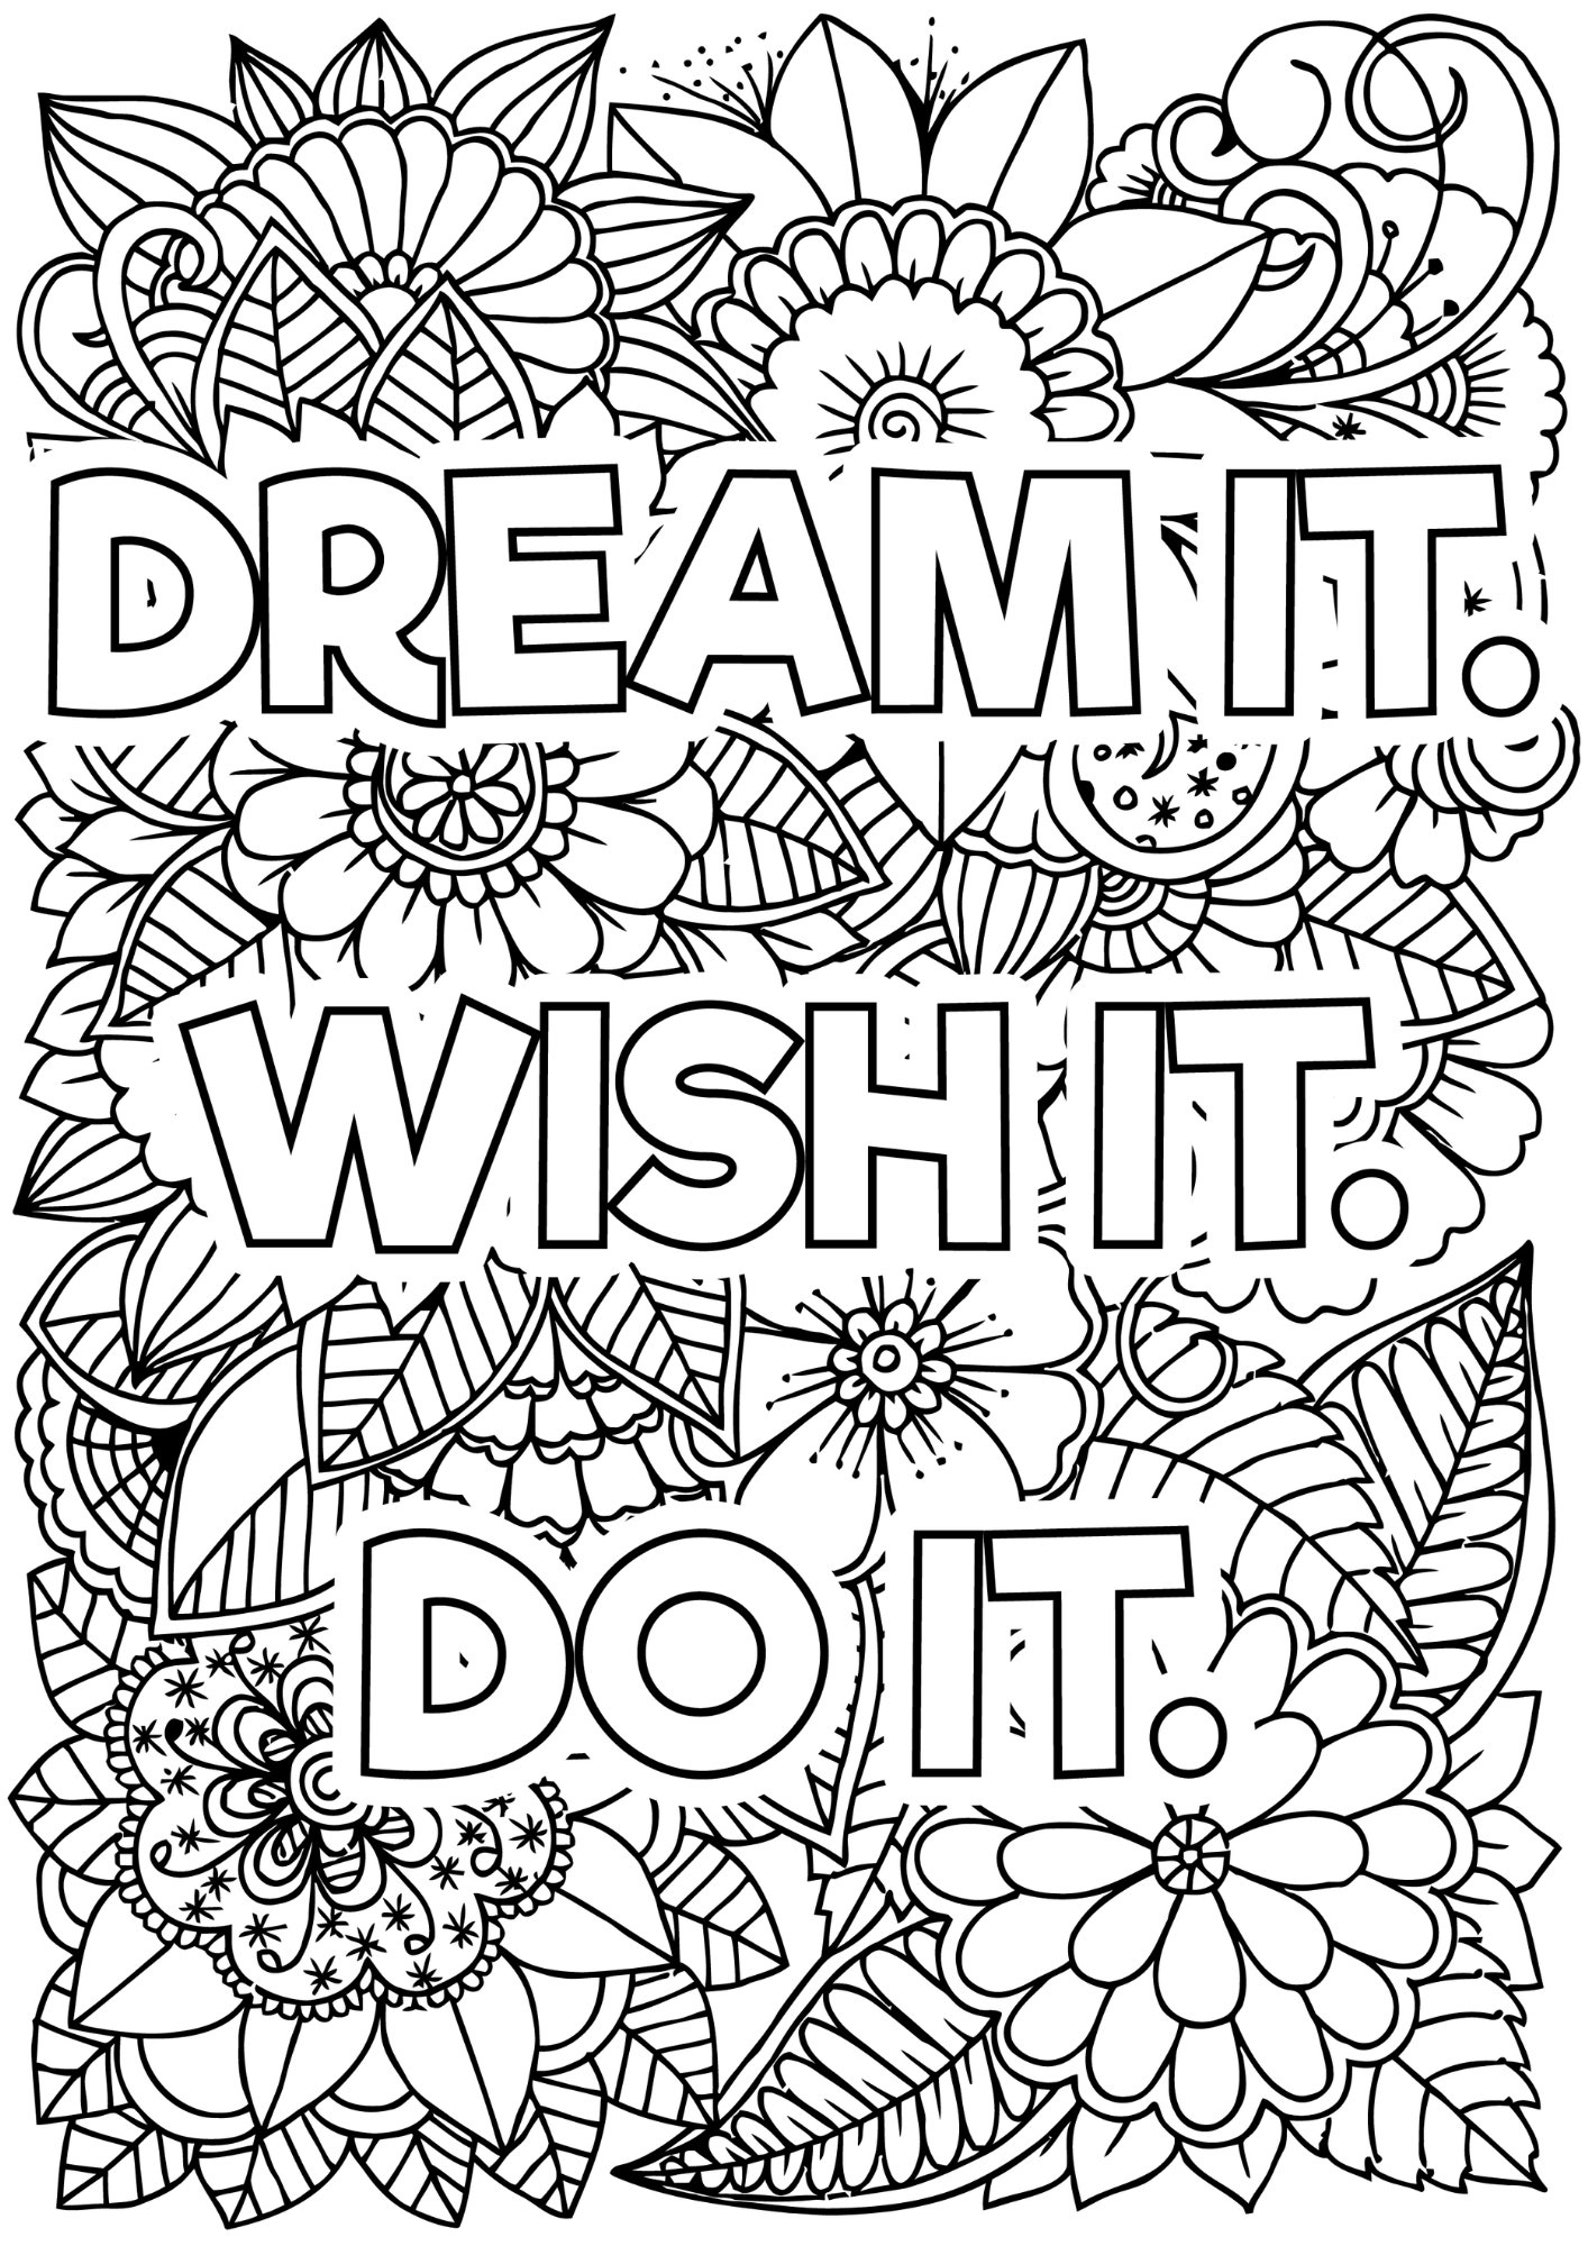 Motivational Printable Colouring Pages for Adults Download | Etsy